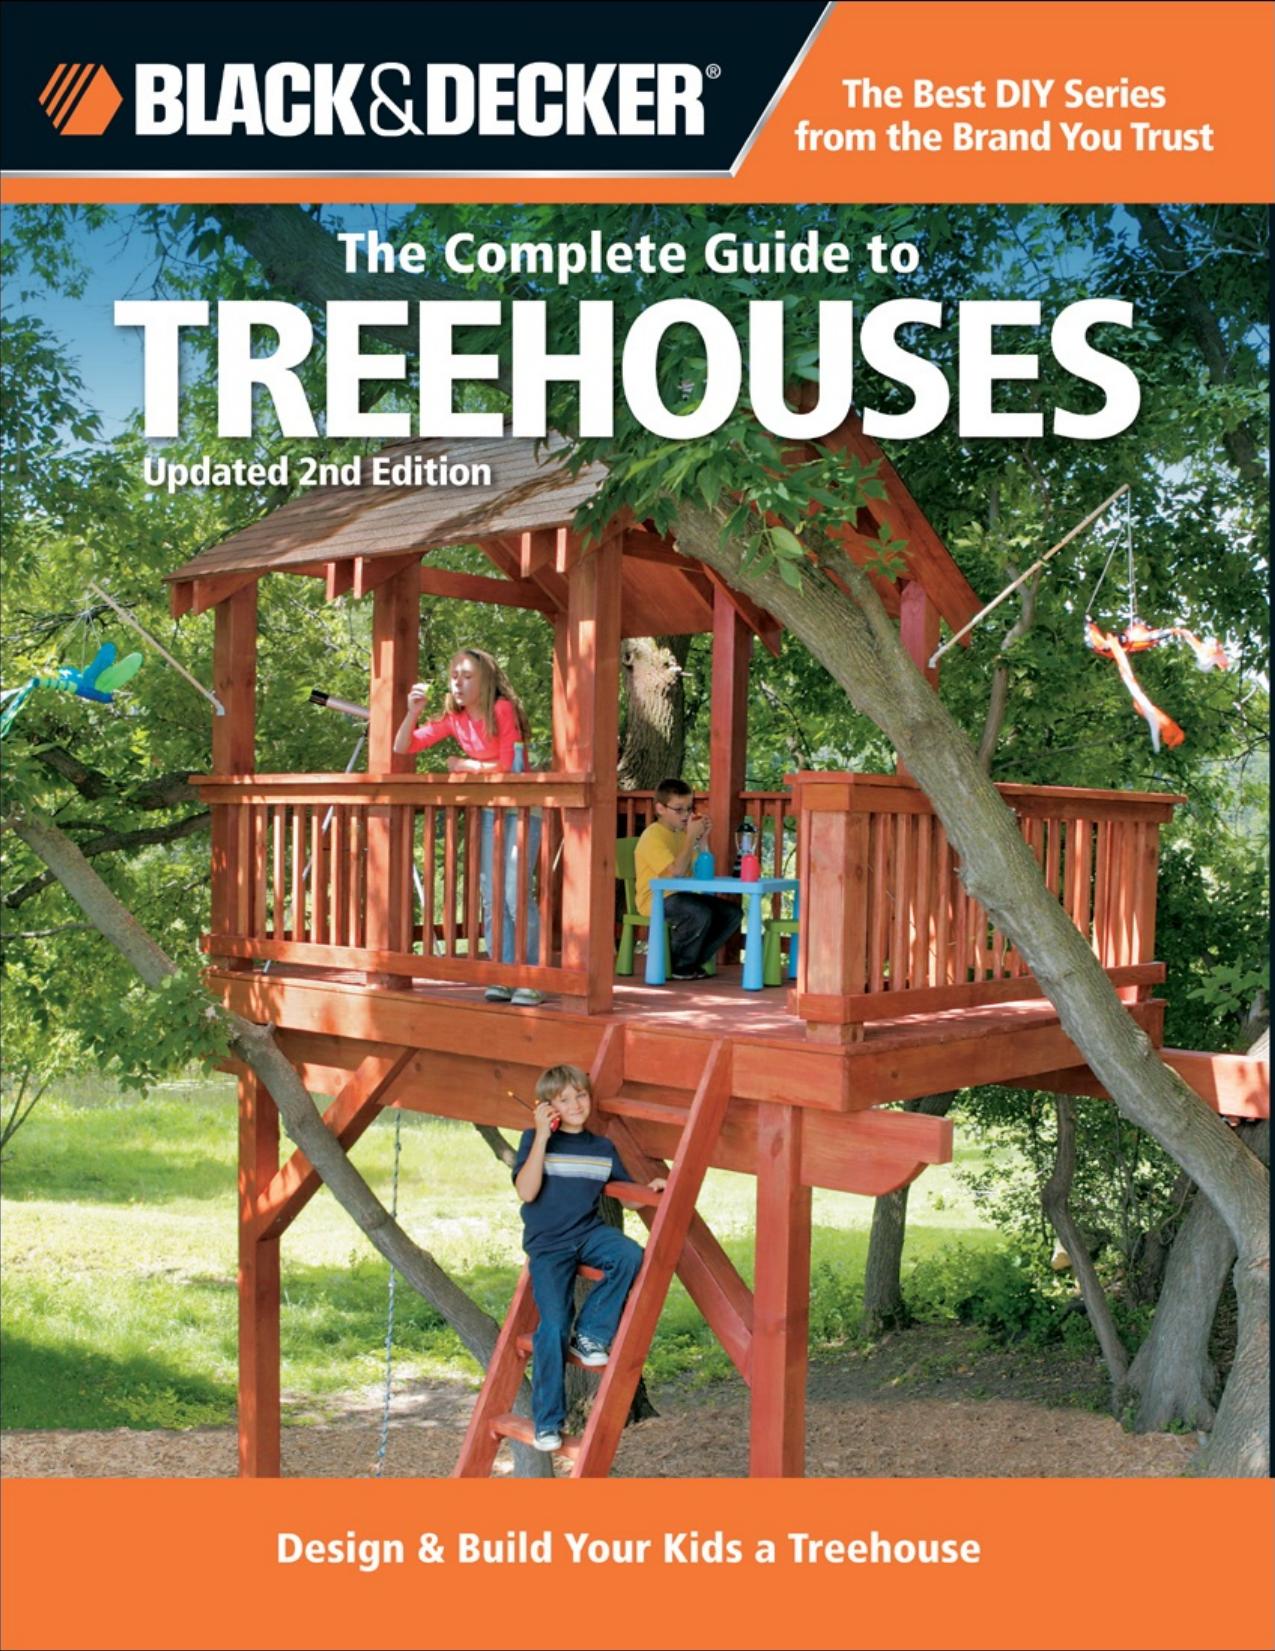 Black & Decker The Complete Guide to Treehouses by Philip Schmidt